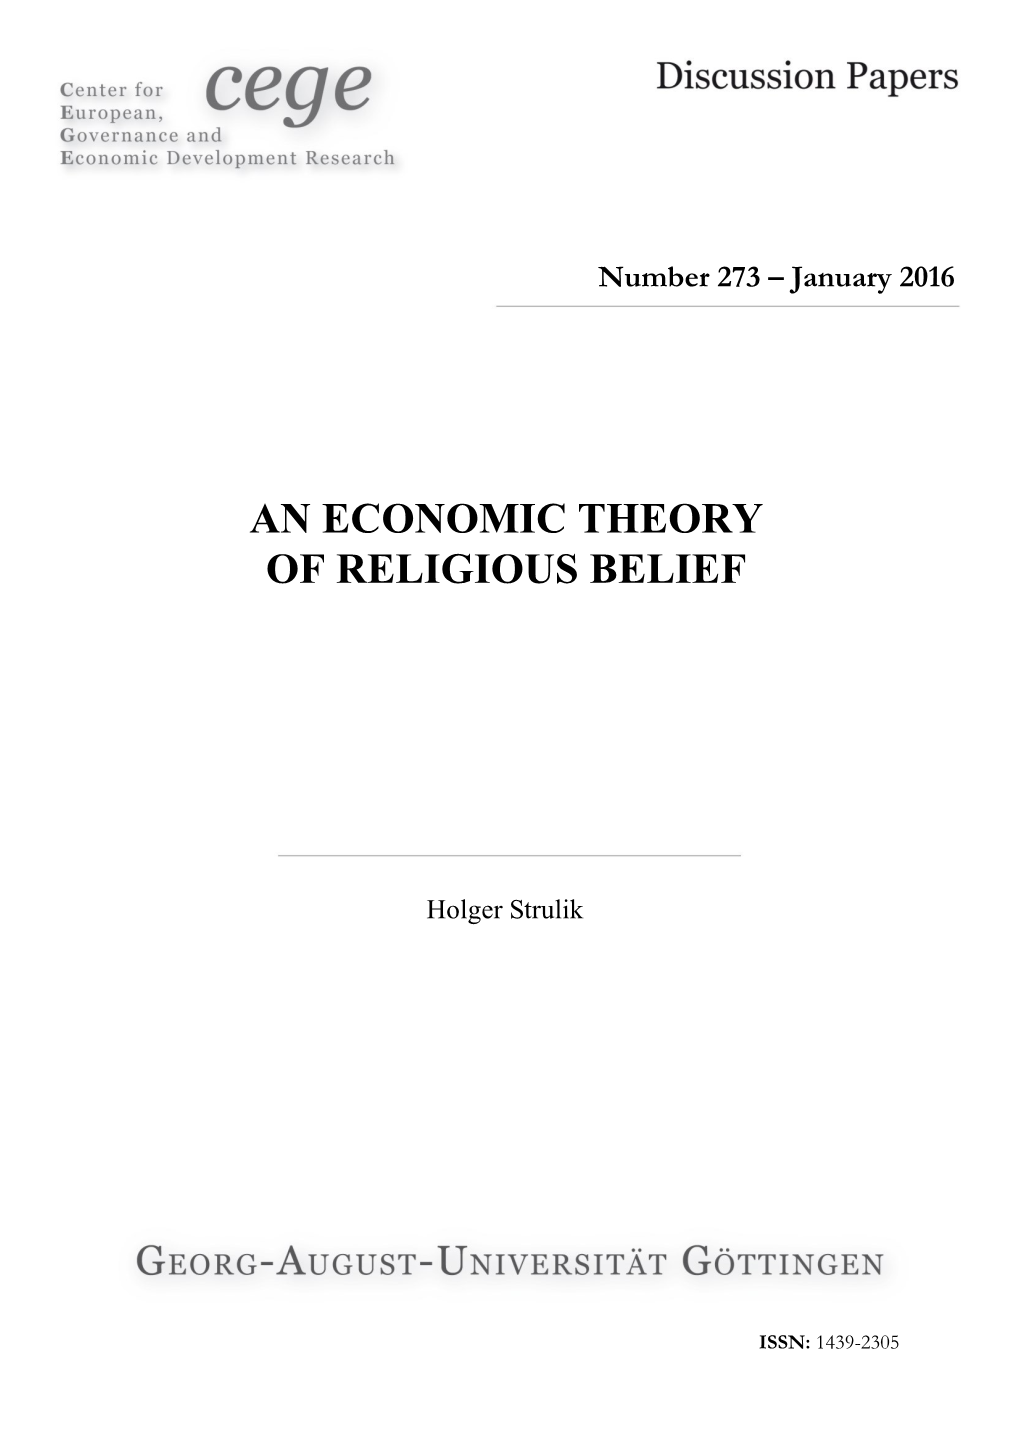 An Economic Theory of Religious Belief